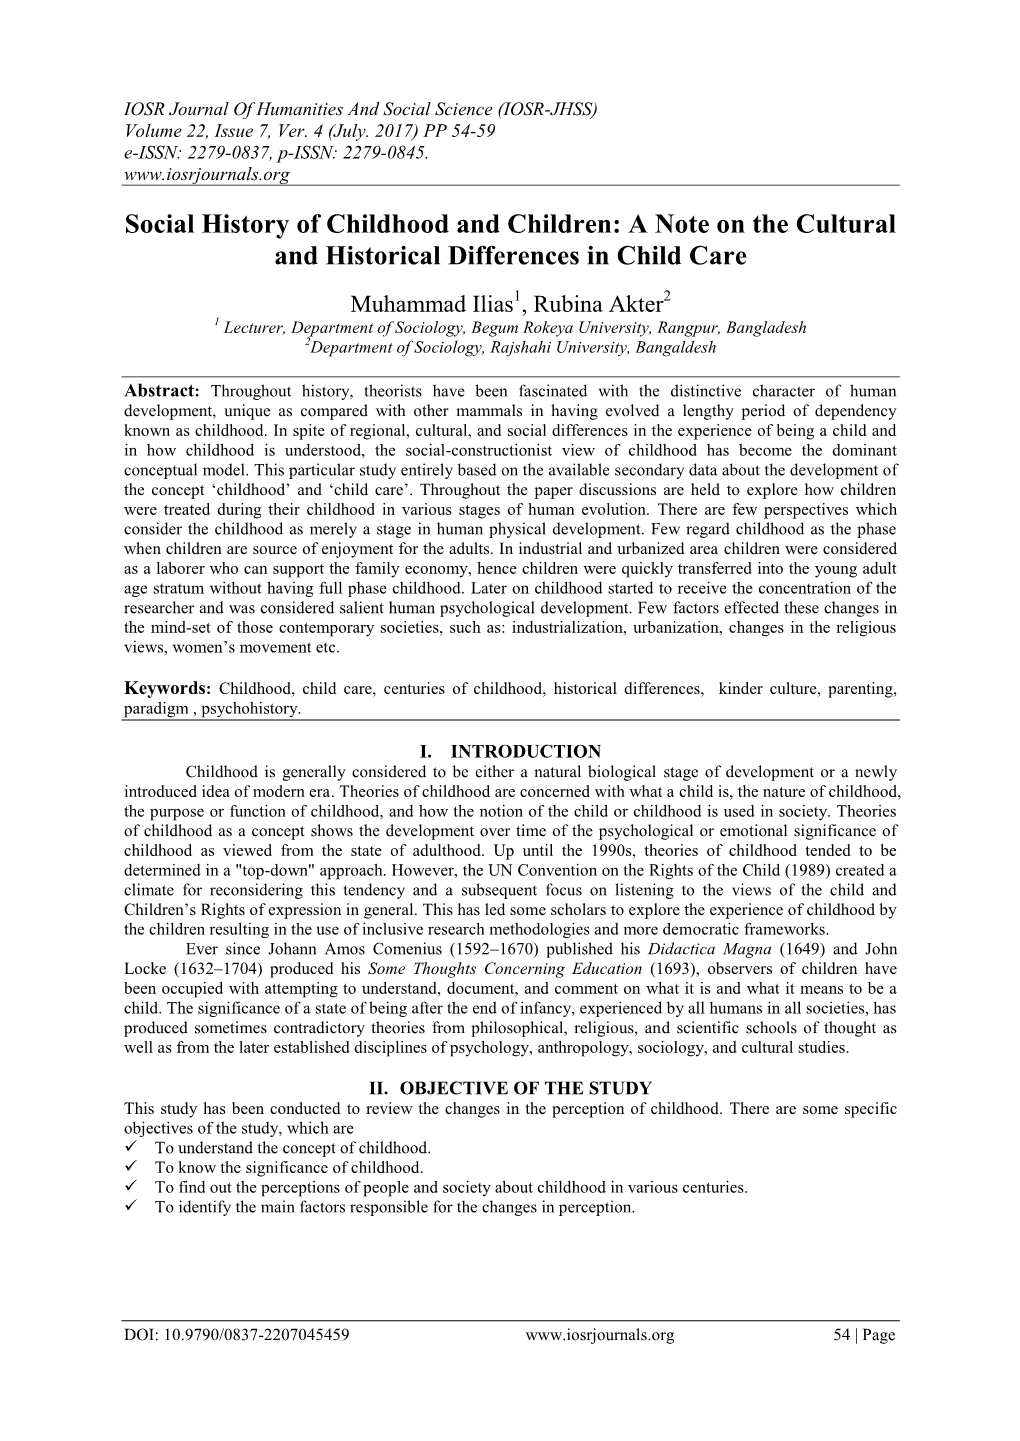 Social History of Childhood and Children: a Note on the Cultural and Historical Differences in Child Care